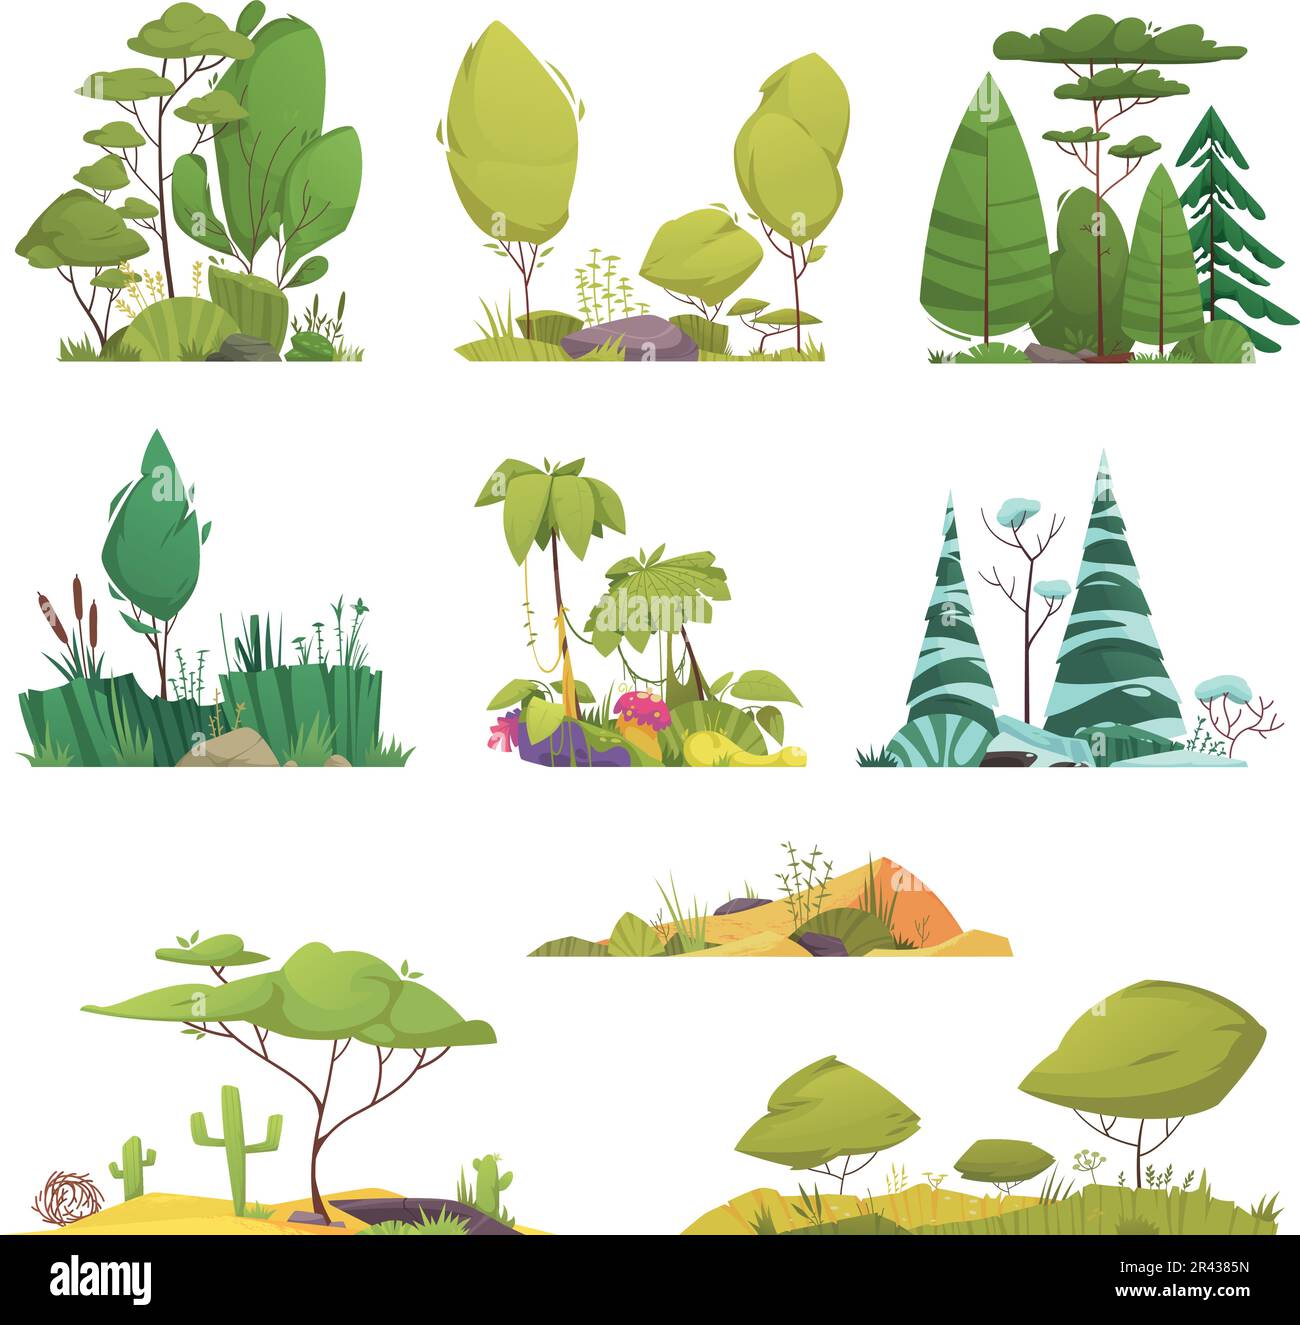 Ecosystem types cartoon icons set with different trees and flora systems isolated vector illustration Stock Vector